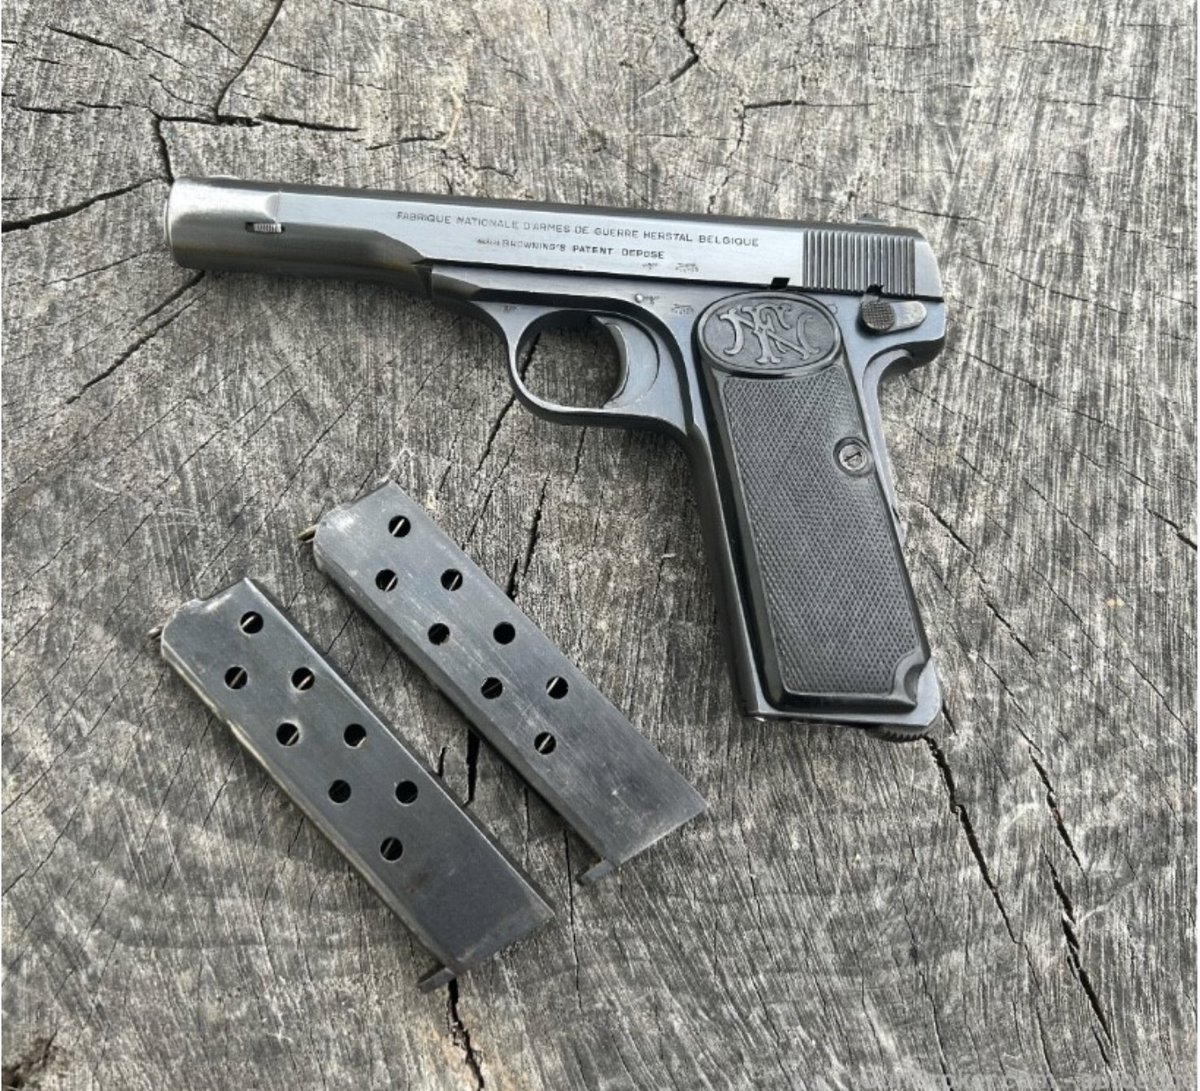 🔥 Would you add an FN Browning Model 1922 Pistol WW2 German Luftwaffe to your collection?
🔥 See them here: bit.ly/3nSbydm

#gunbroker #browning1922